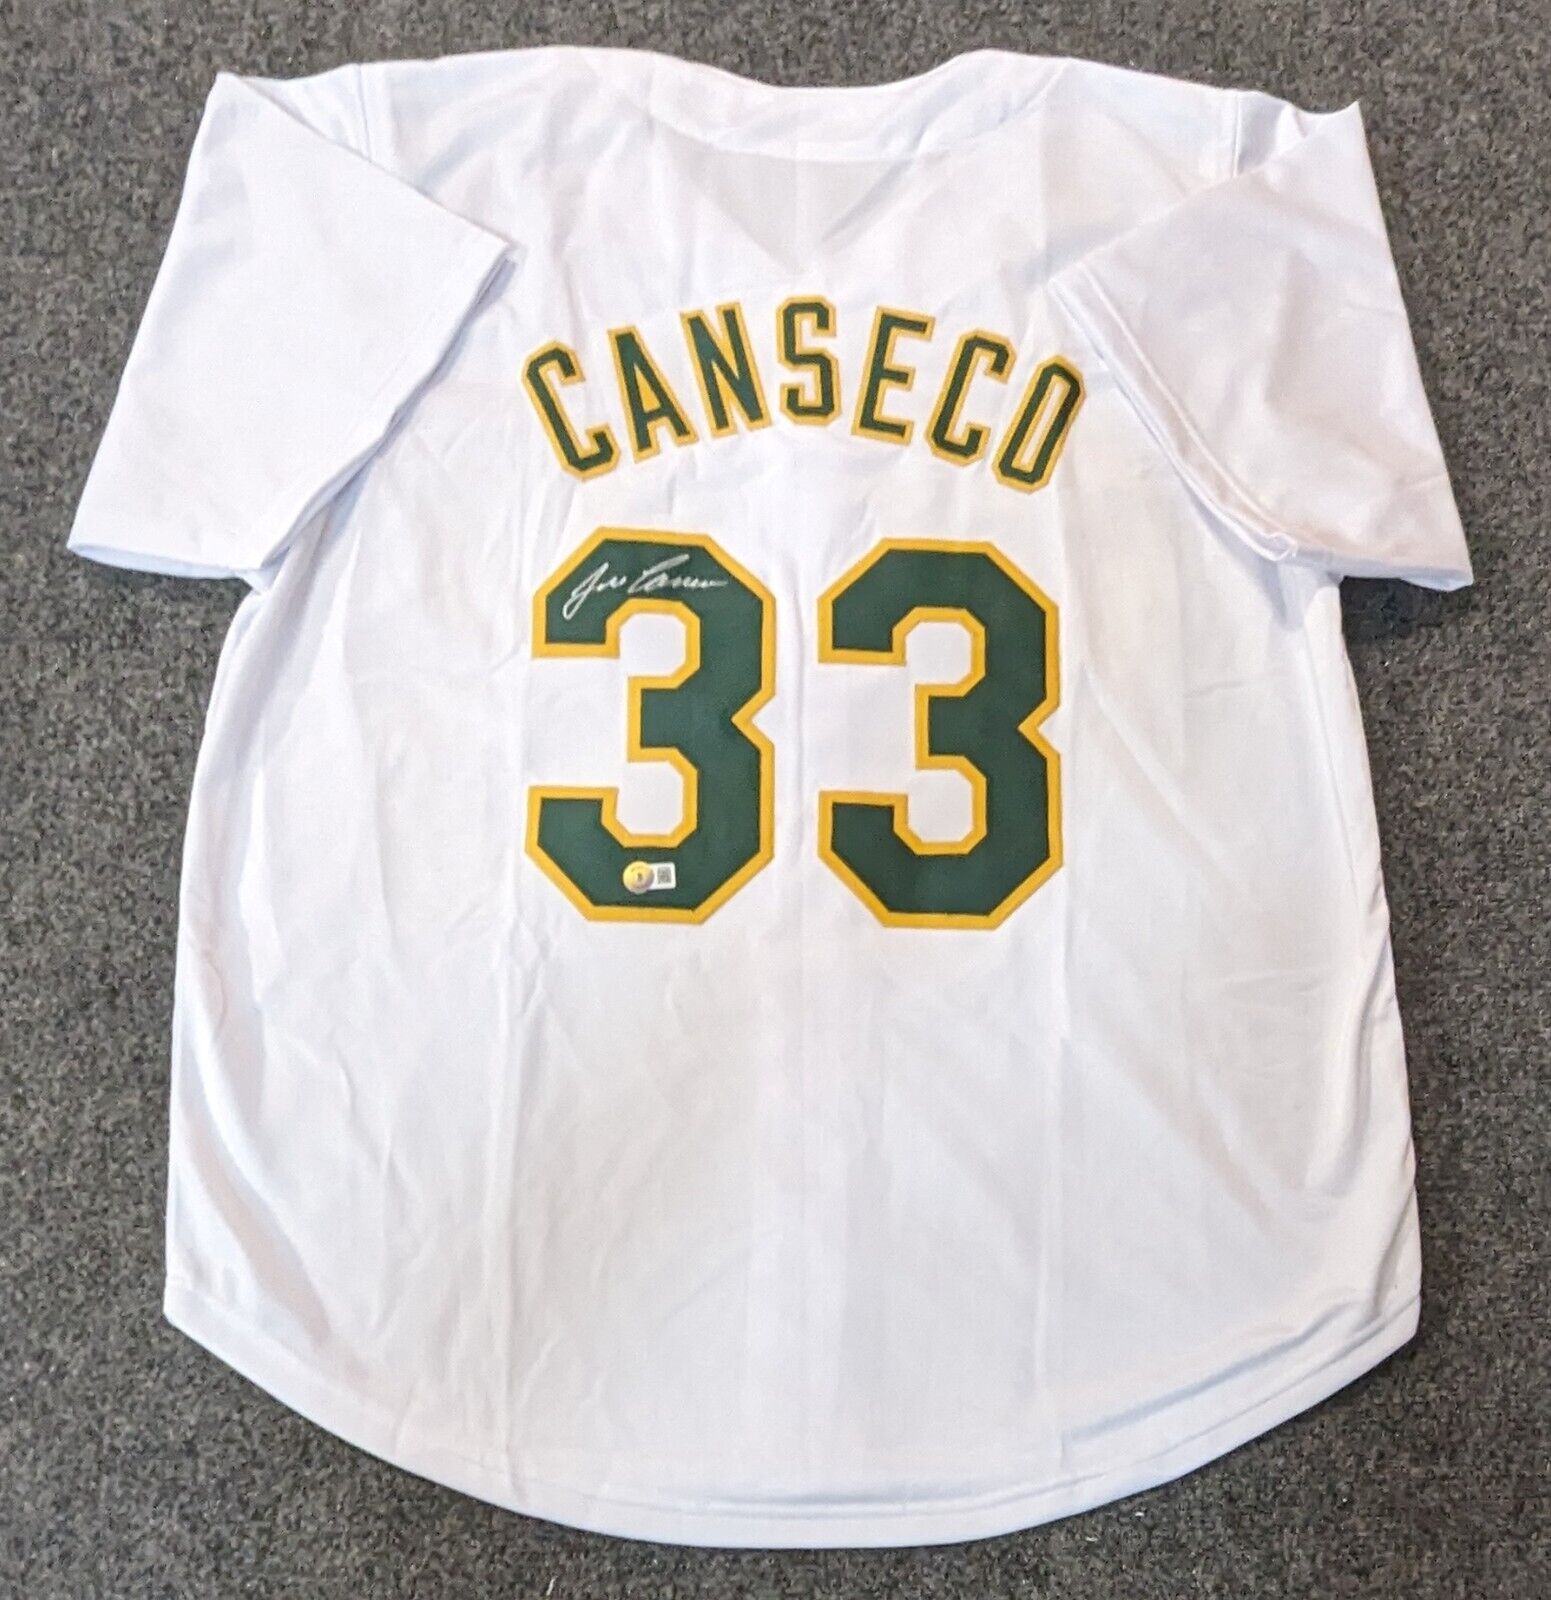 Jose Canseco Autographed Signed Oakland A's Framed Jersey 